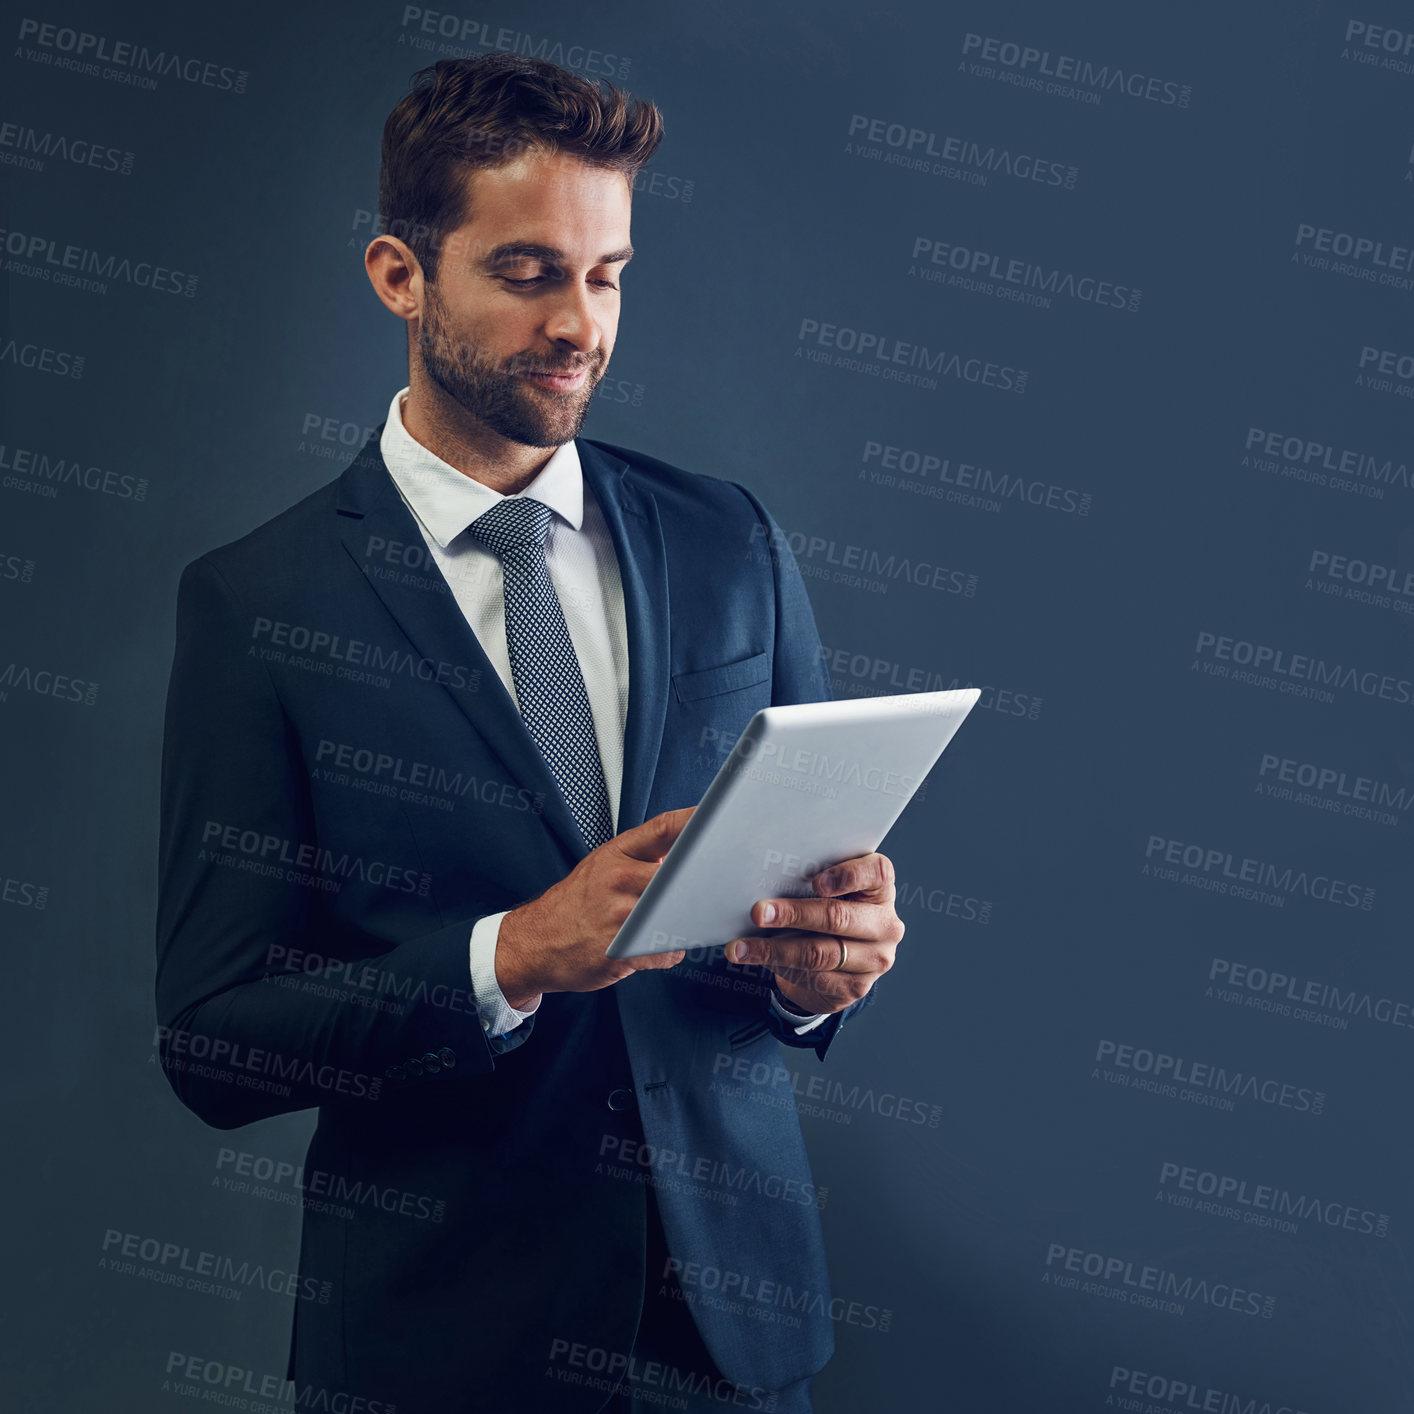 Buy stock photo Studio shot of a handsome young businessman using a digital tablet against a dark background